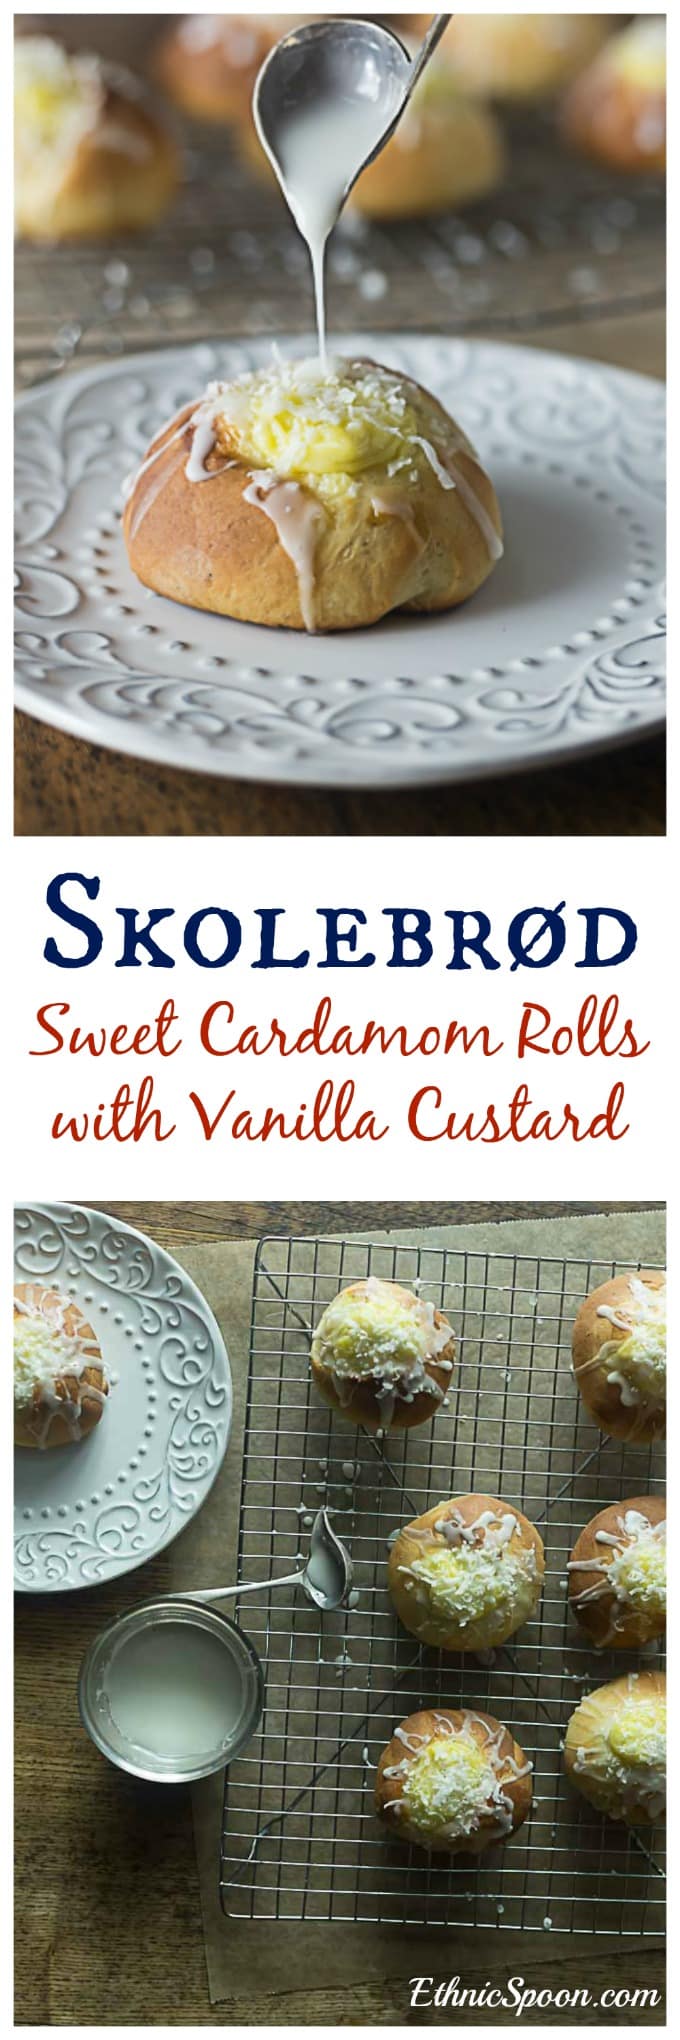 Skolebrød or skolleboller buns are a sweet pastry with cardamom, filled with vanilla custard and topped off with a glaze and chopped coconut.| ethnicspoon.com